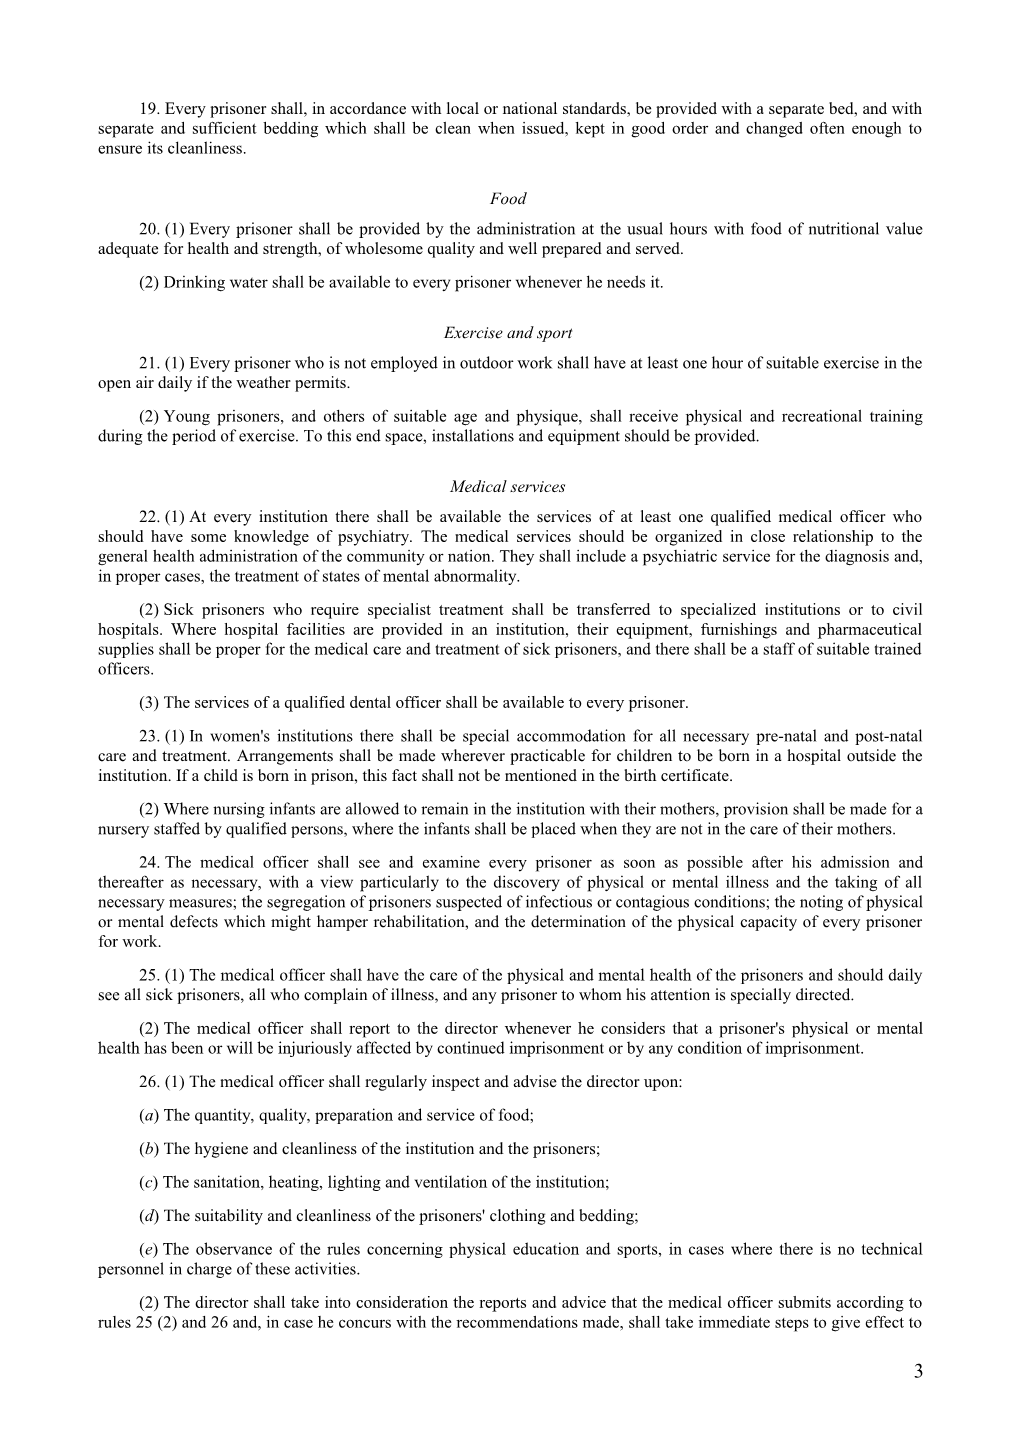 Standard Minimum Rules for the Treatment of Prisoners